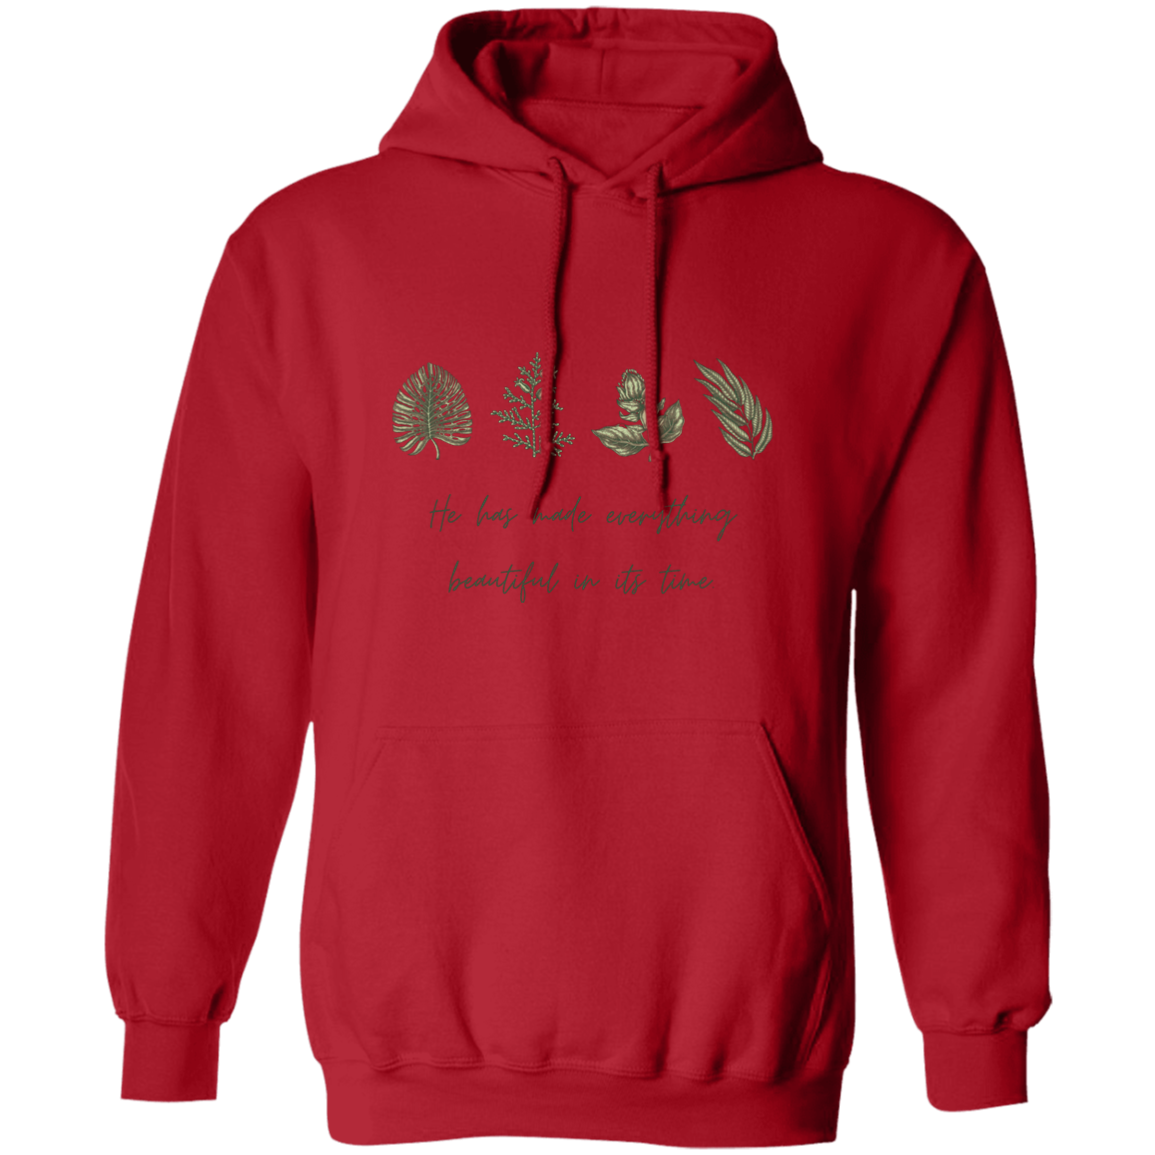 Everything Beautiful Pullover Hoodie